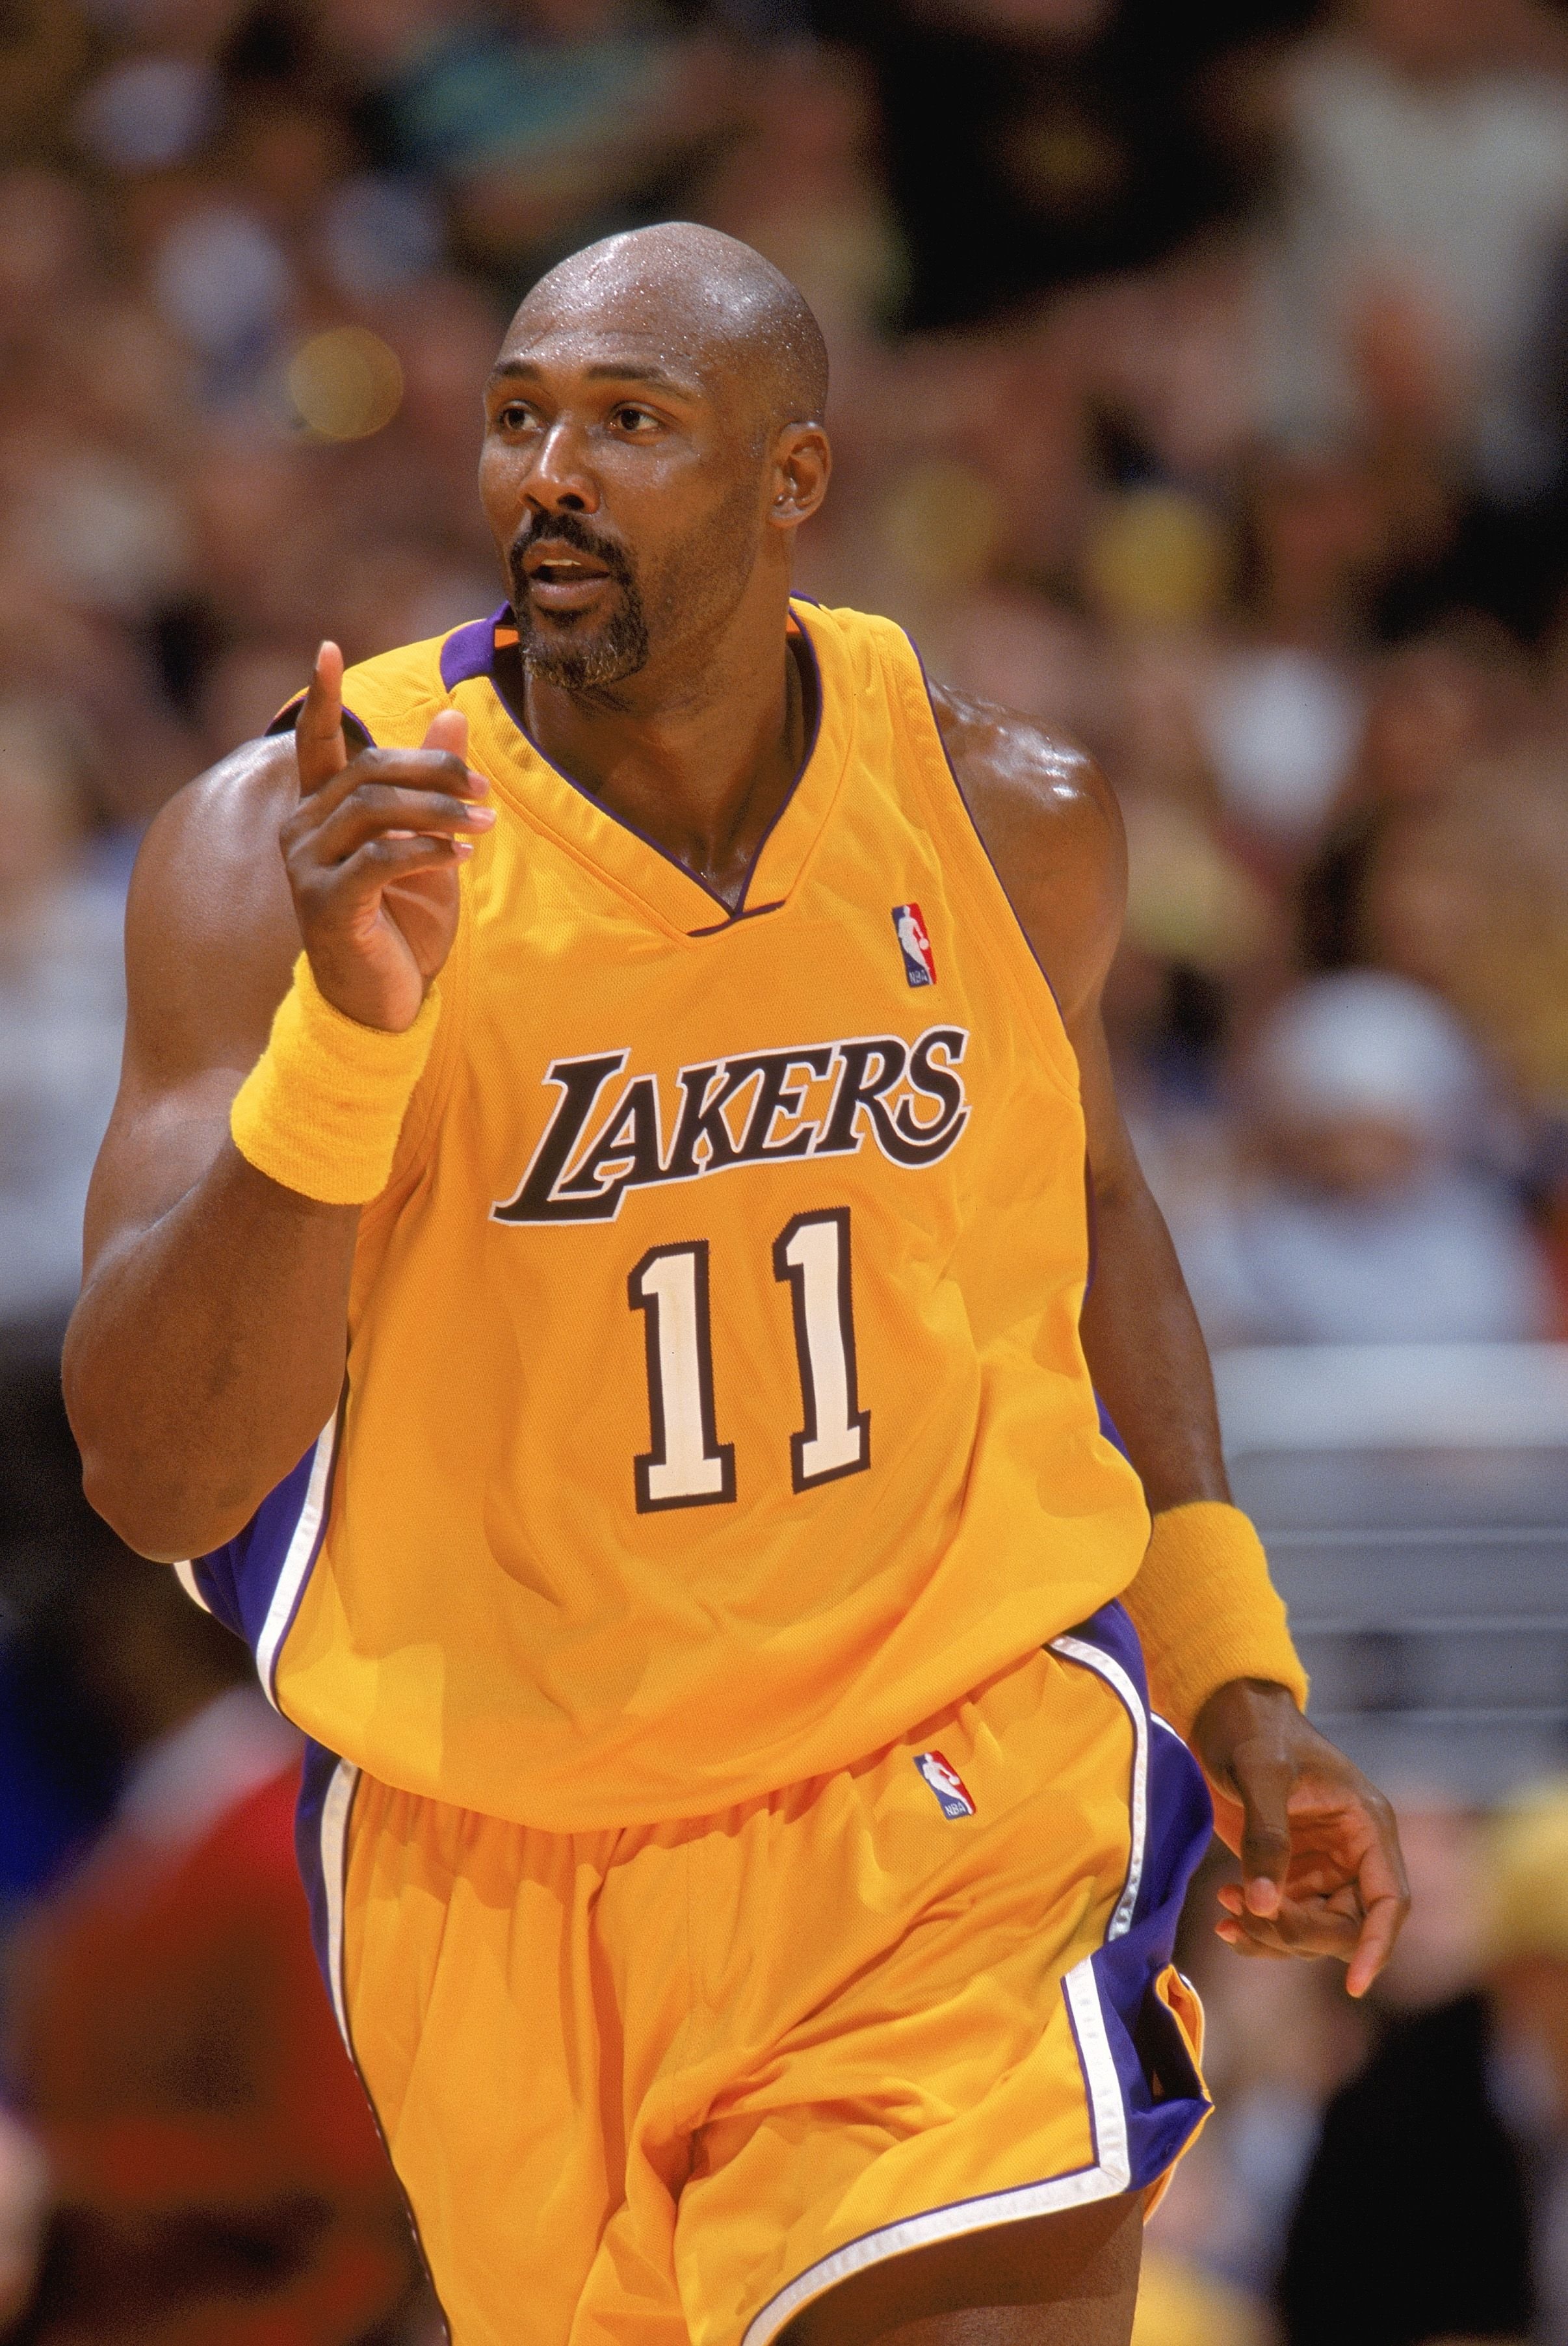 Karl Malone  runs up court in Game five of the Western Conference Quarterfinals during the 2004 NBA Playoffs against the Houston Rockets at Staples Center on April 28, 2004 in Los Angeles, California. | Source: Getty Images